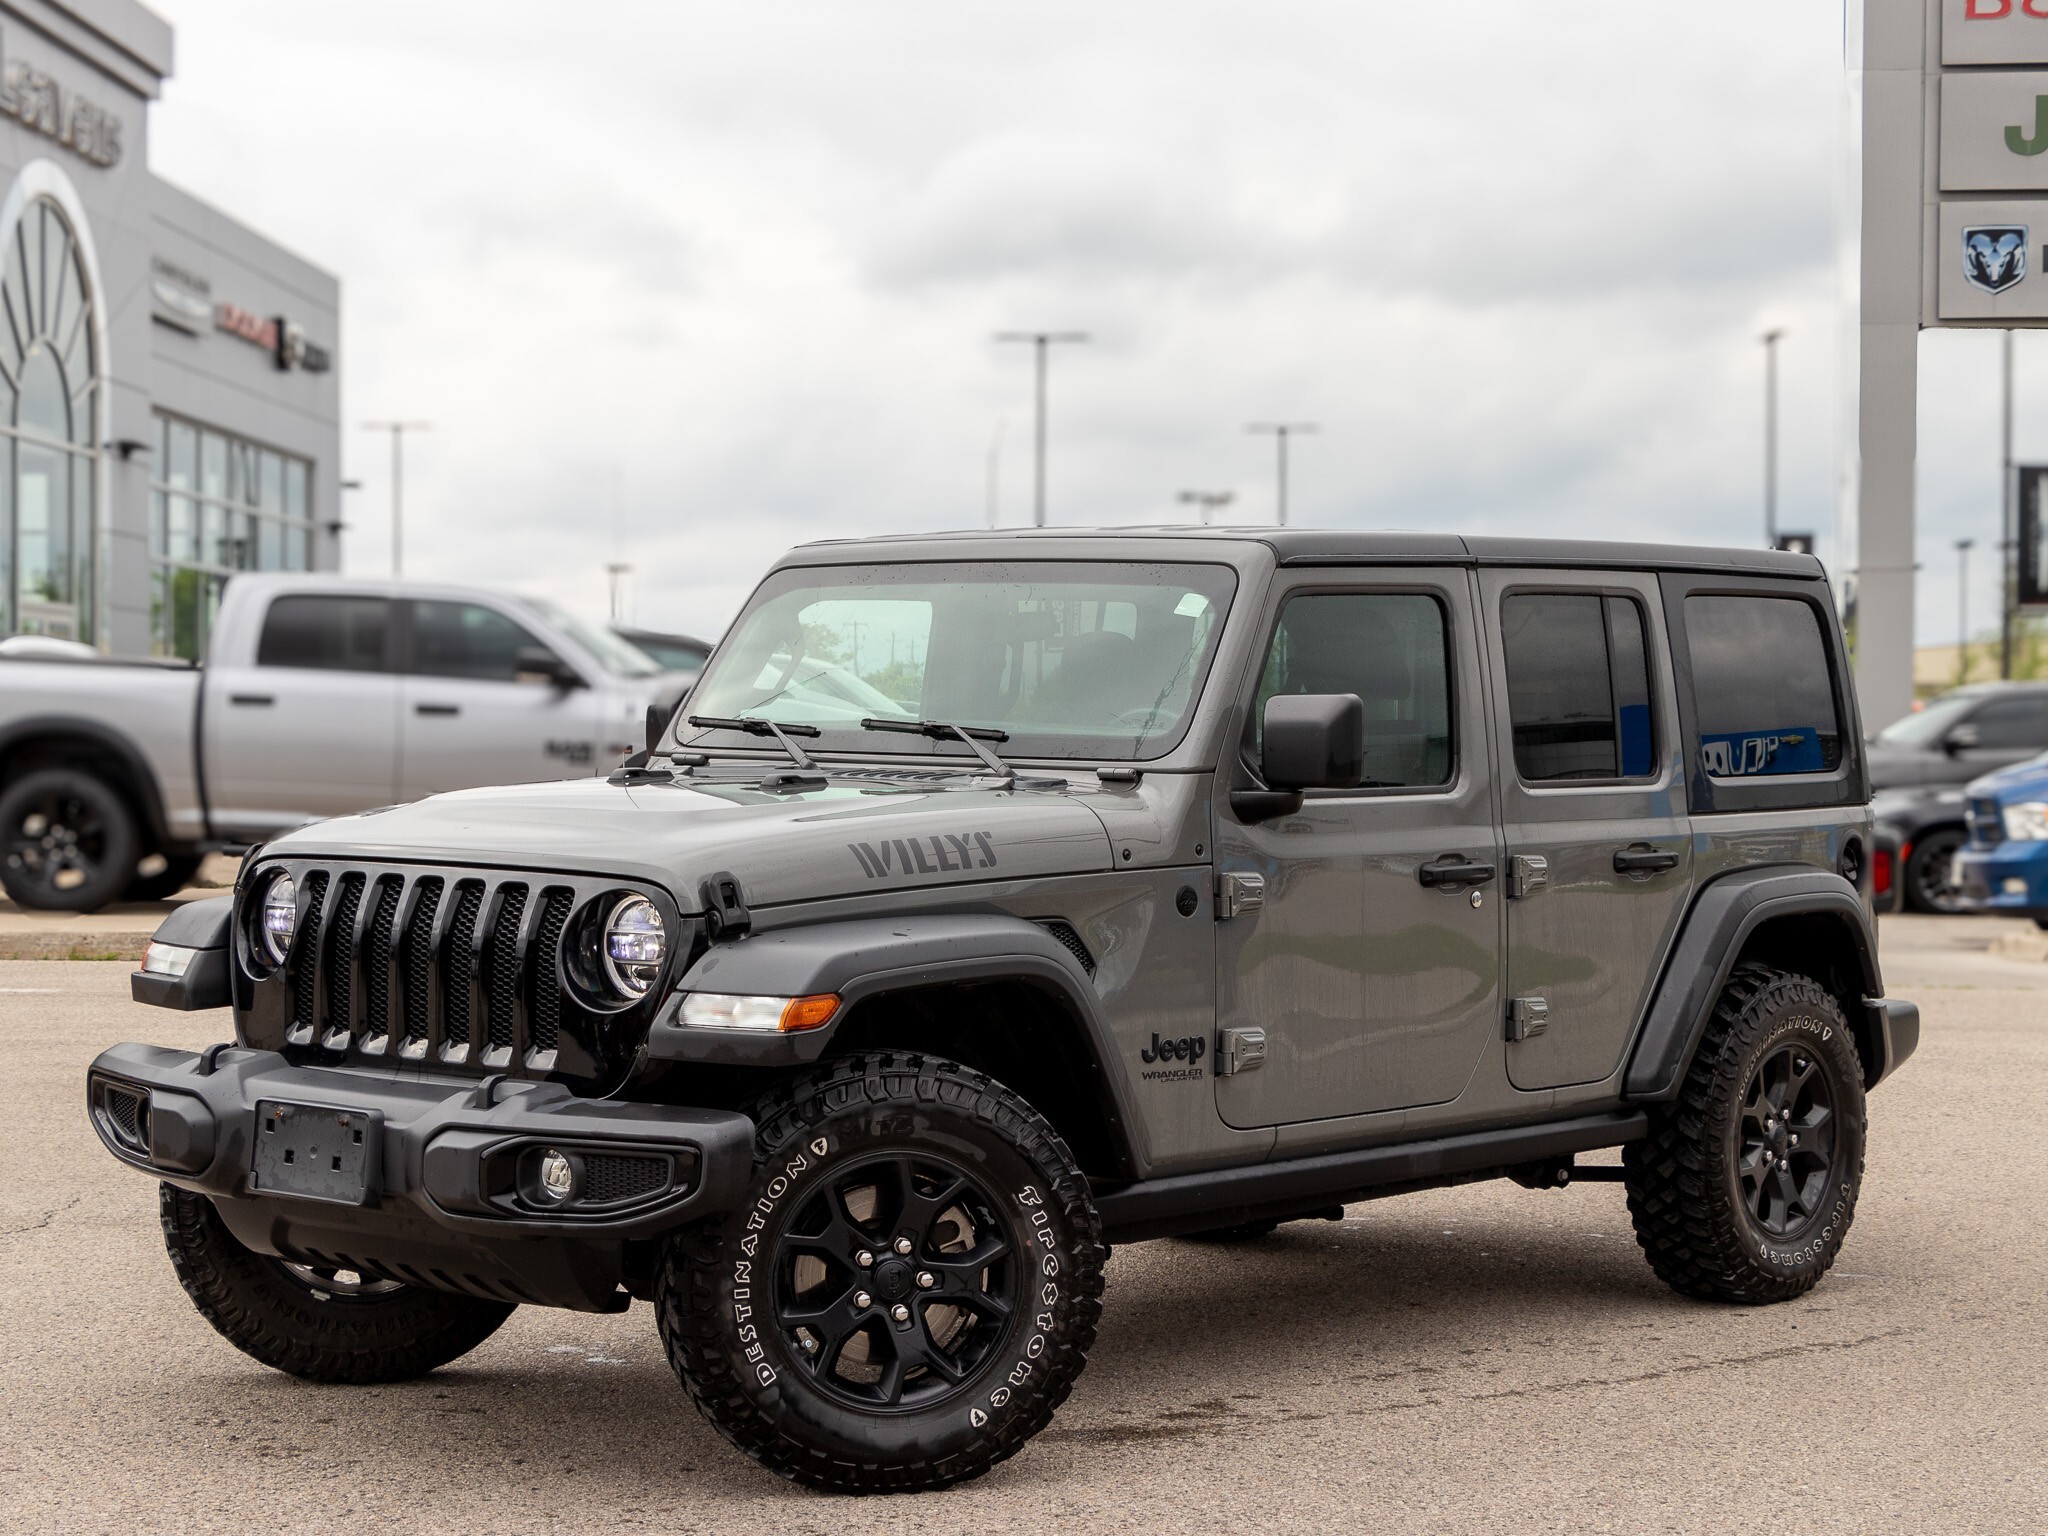 2021 Jeep WRANGLER UNLIMITED Sport Willys | Hard Top | Push-button Start | Tint